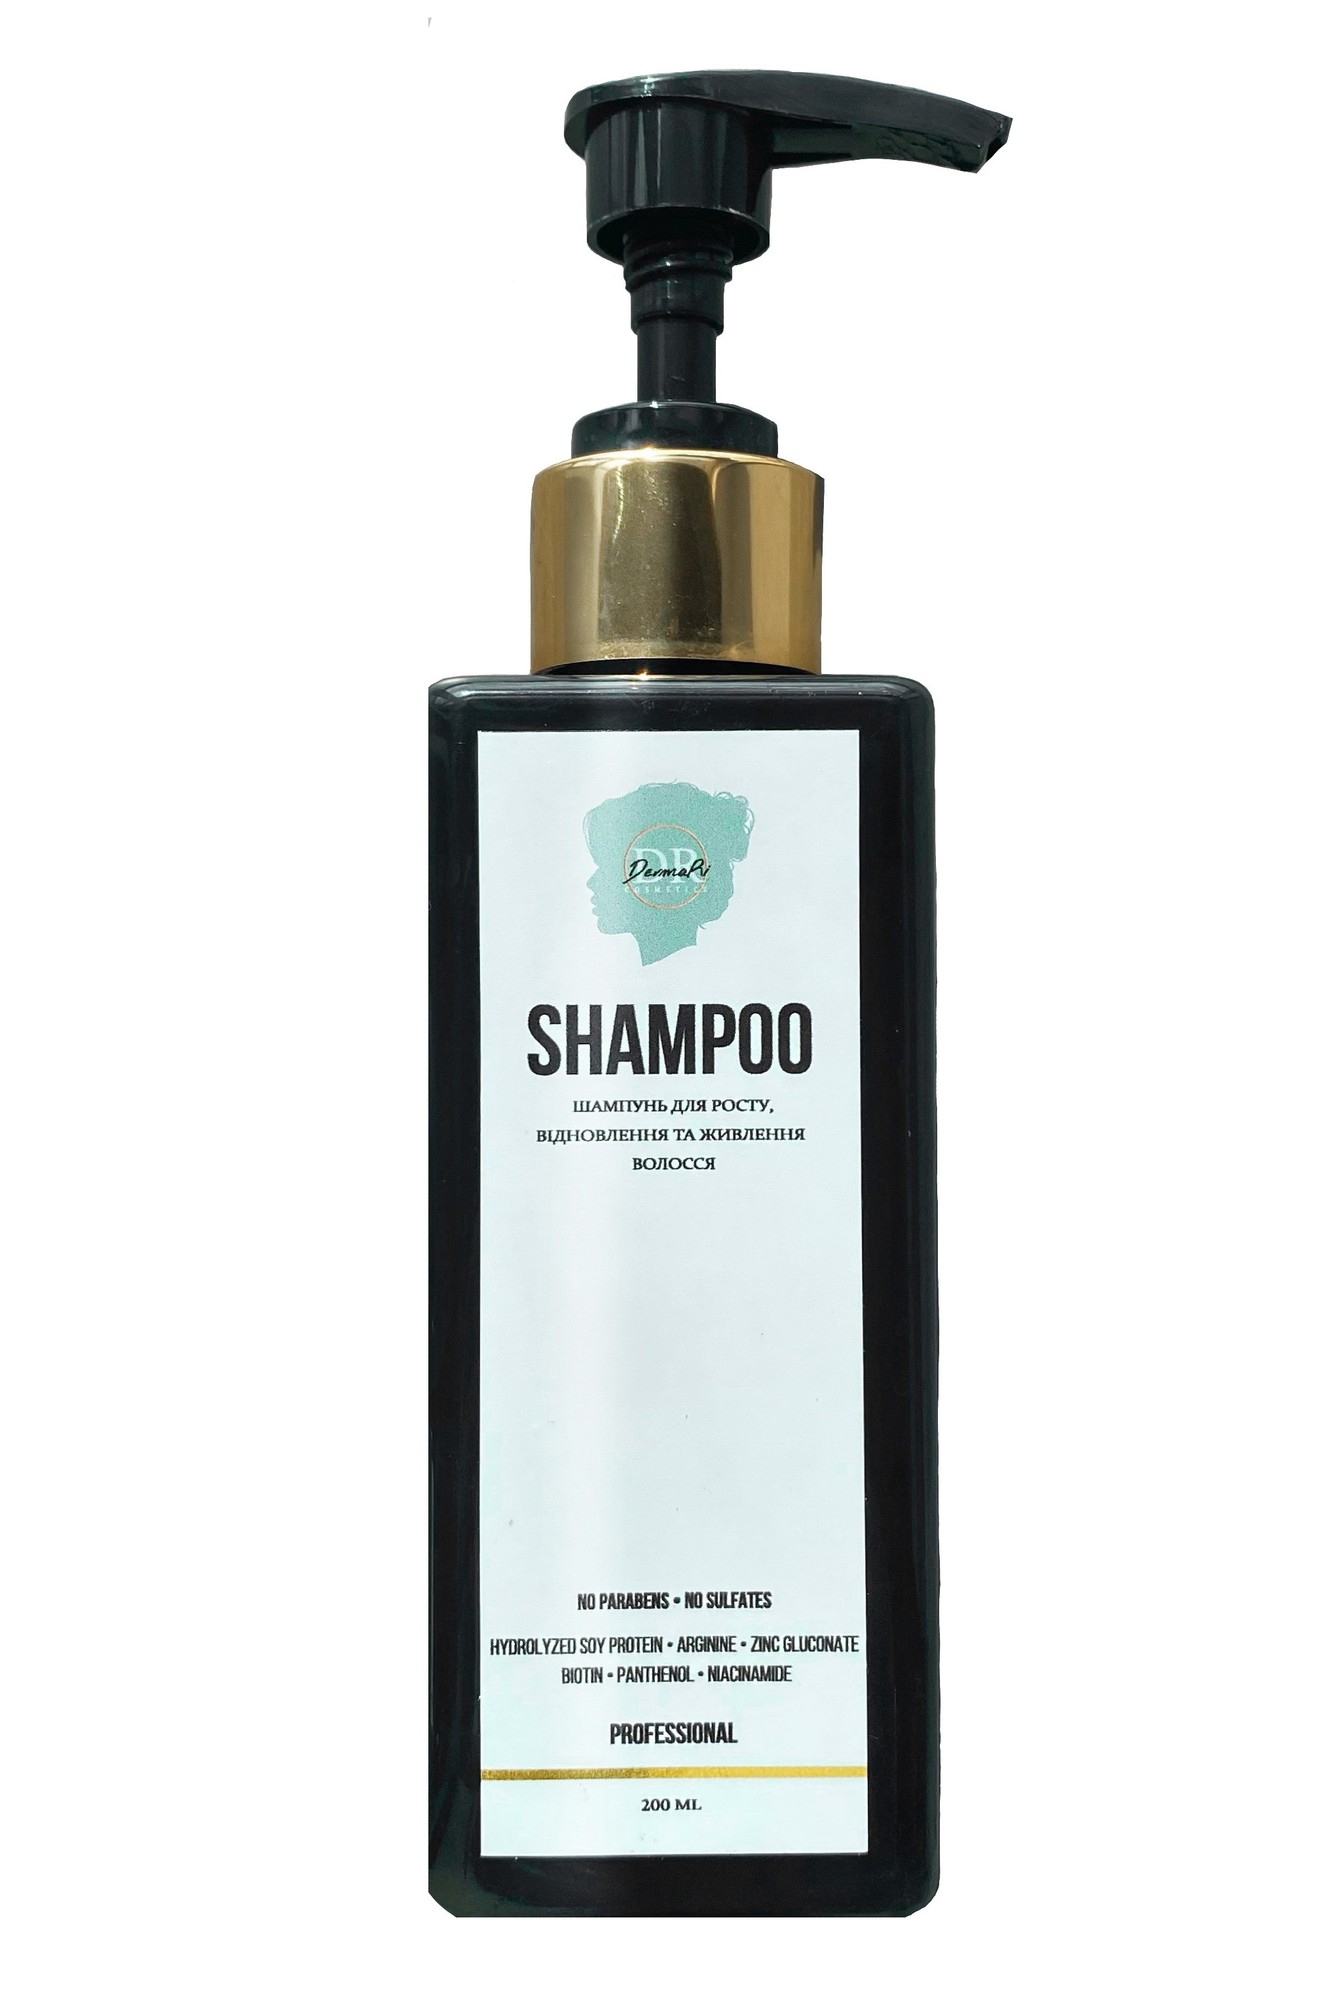 SHAMPOO for hair growth, restoration and nutrition, 200 ml